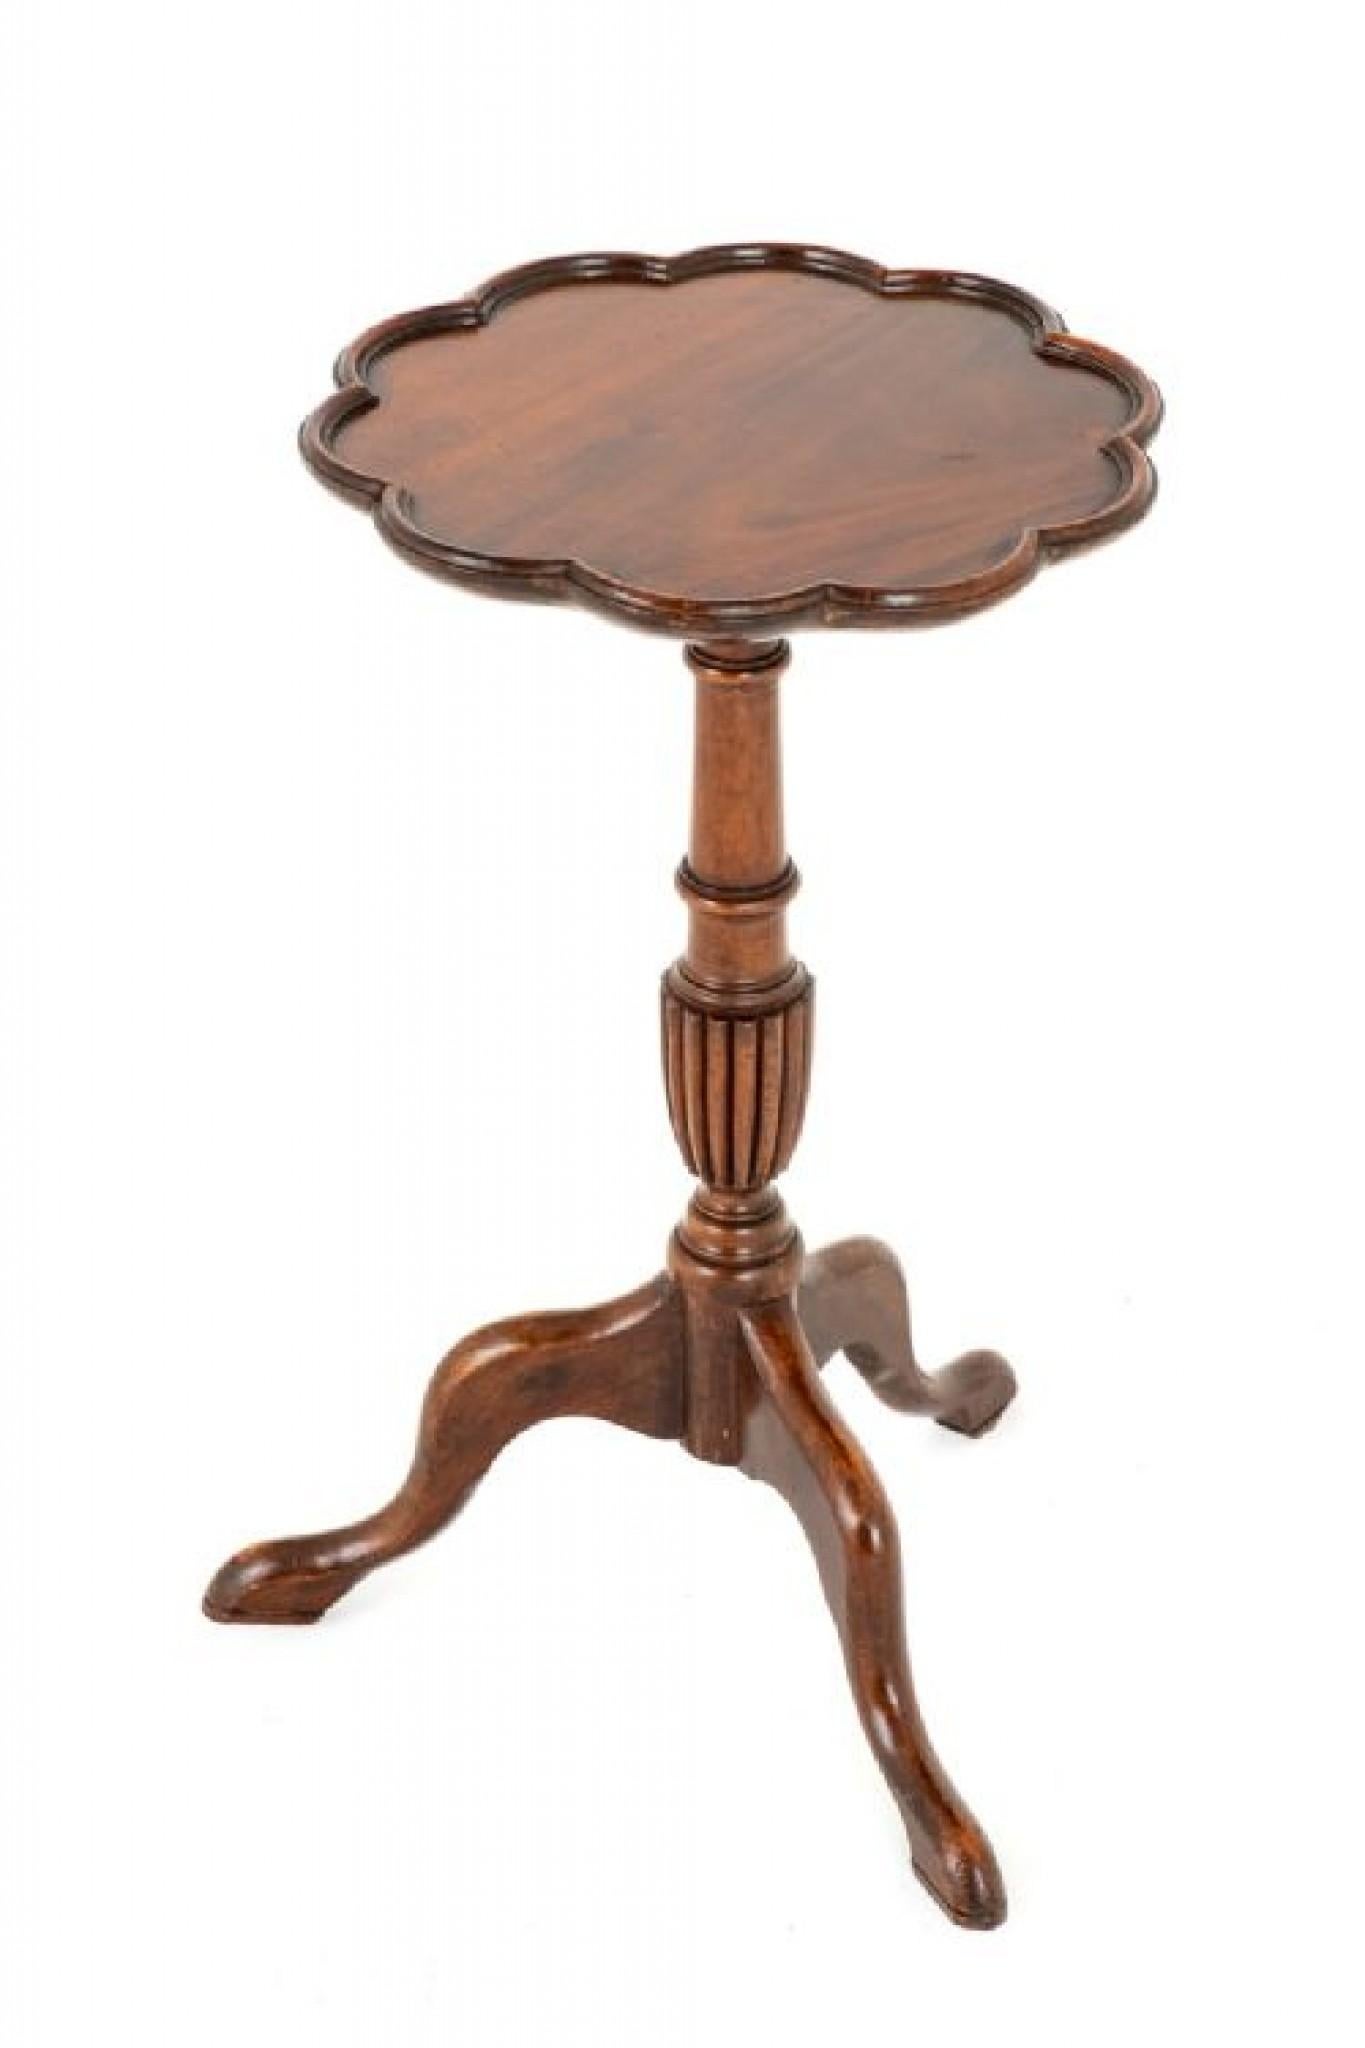 Georgian Revival Mahogany Wine Table.
circa 1930
This Wine Table is raised upon Shaped Legs With a Turned and Fluted Column.
The Top of The Table Having Flame Mahogany Timbers and Finished With Pie Crust Moldings.
Presented in Good Condition.